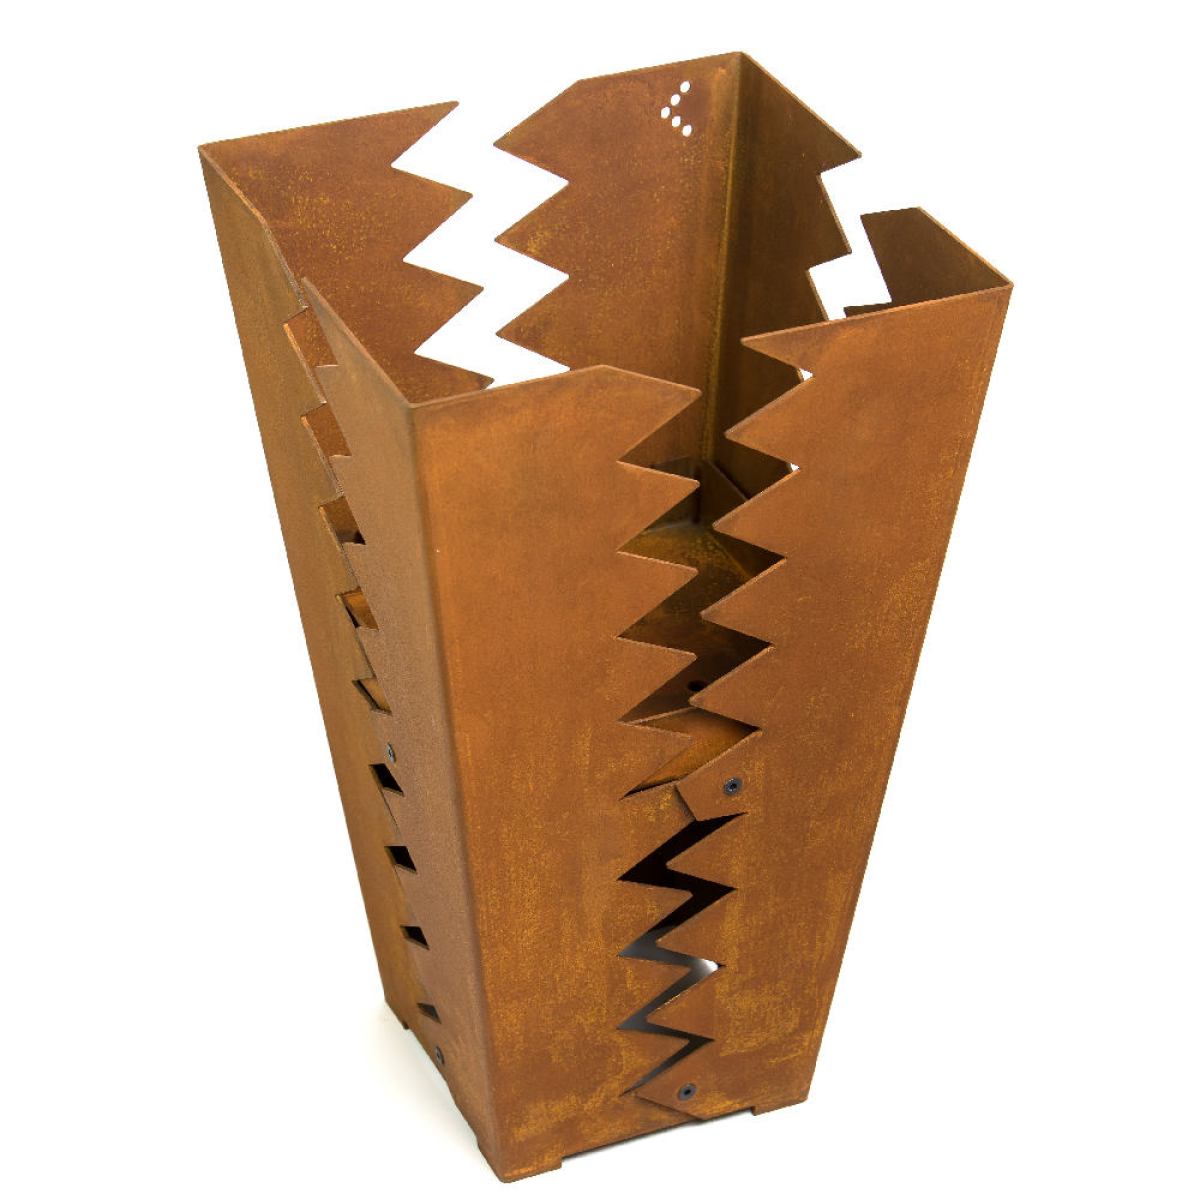 Upright Saw Tooth Design Fire Basket made of Steel